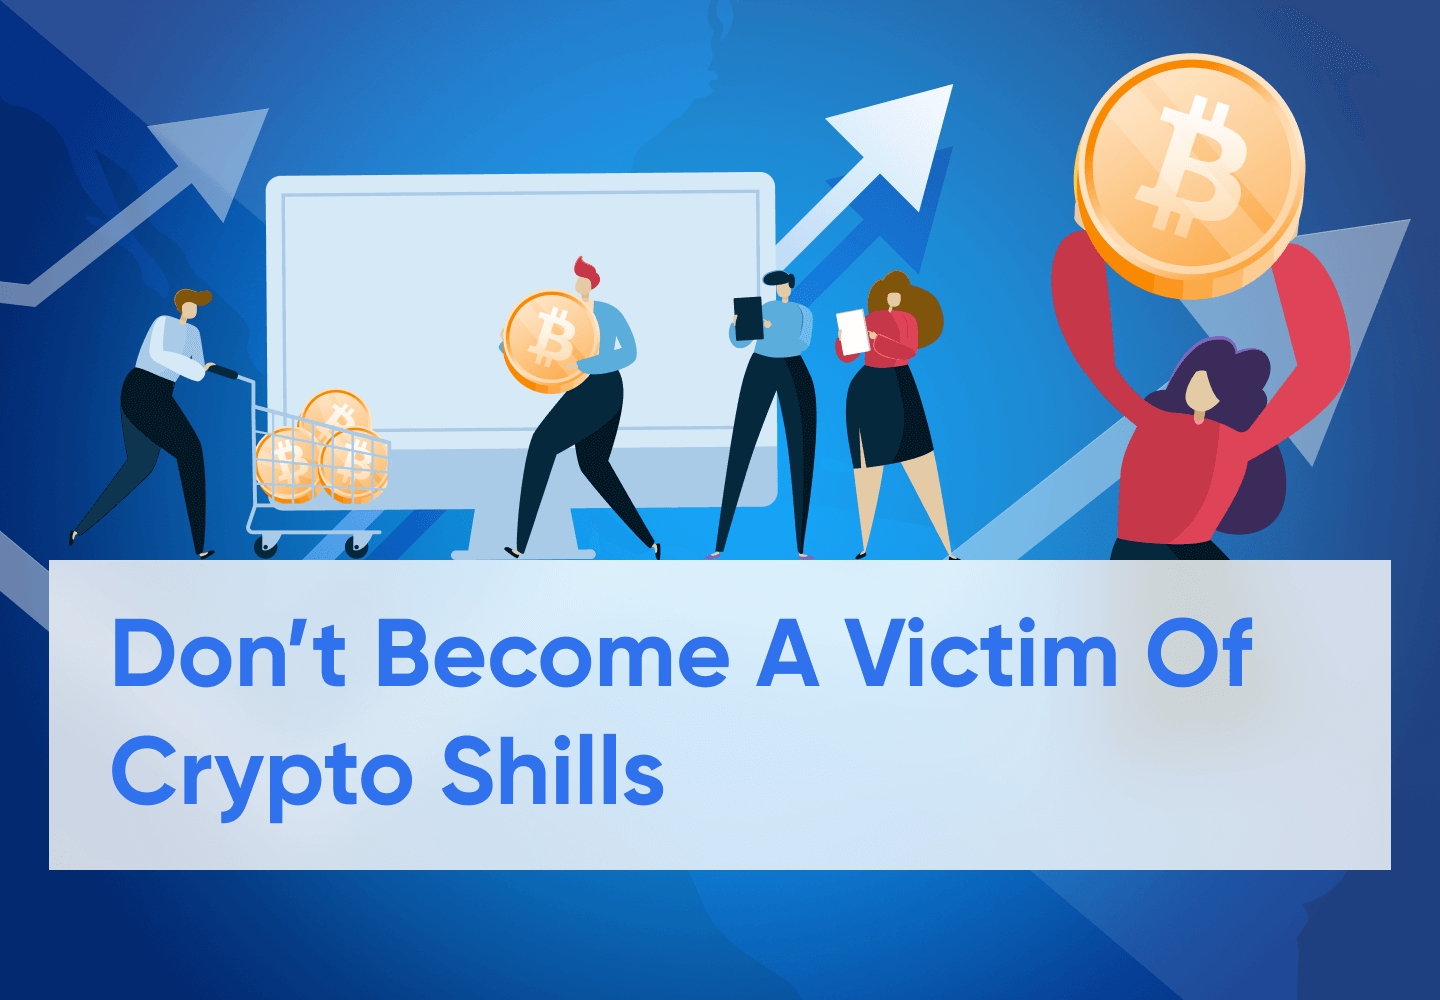 What Exactly is Crypto Shilling?